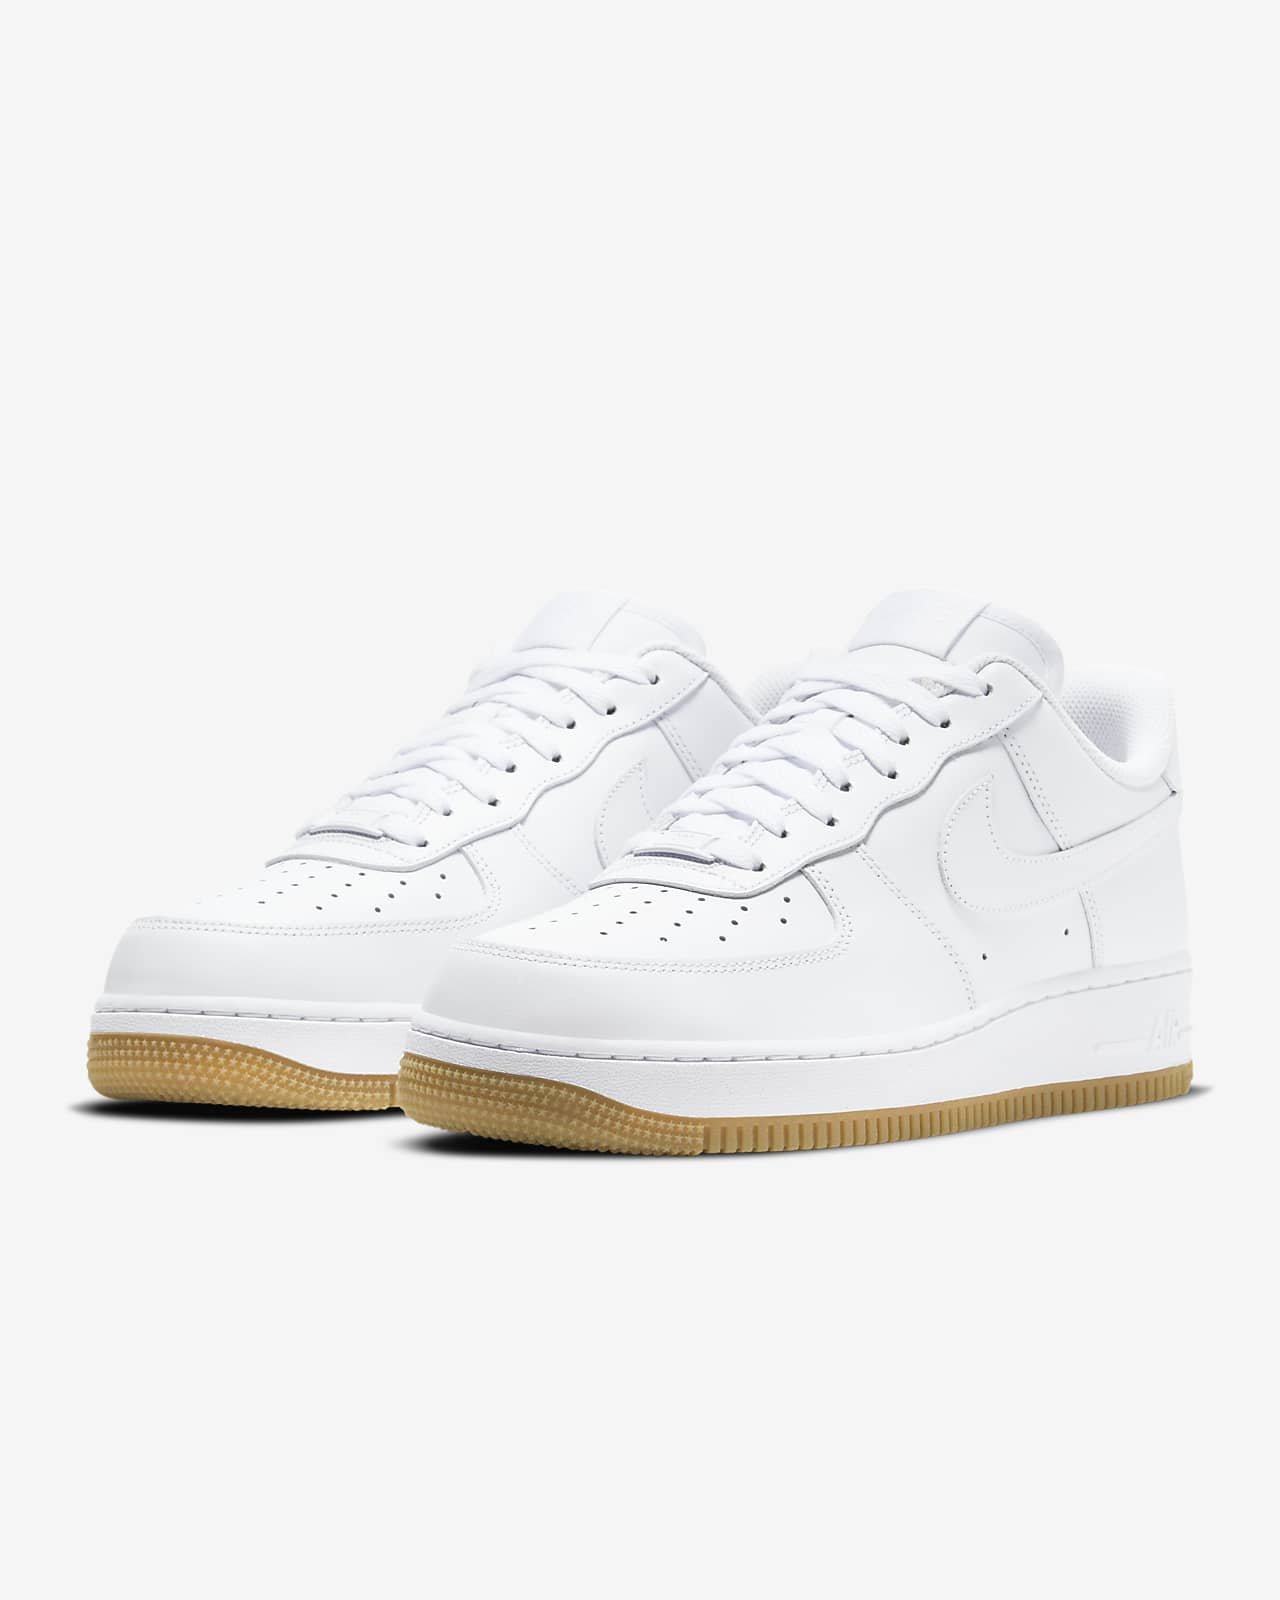 Nike Air Force 1 '07 Men's Shoes شنط مواليد توس